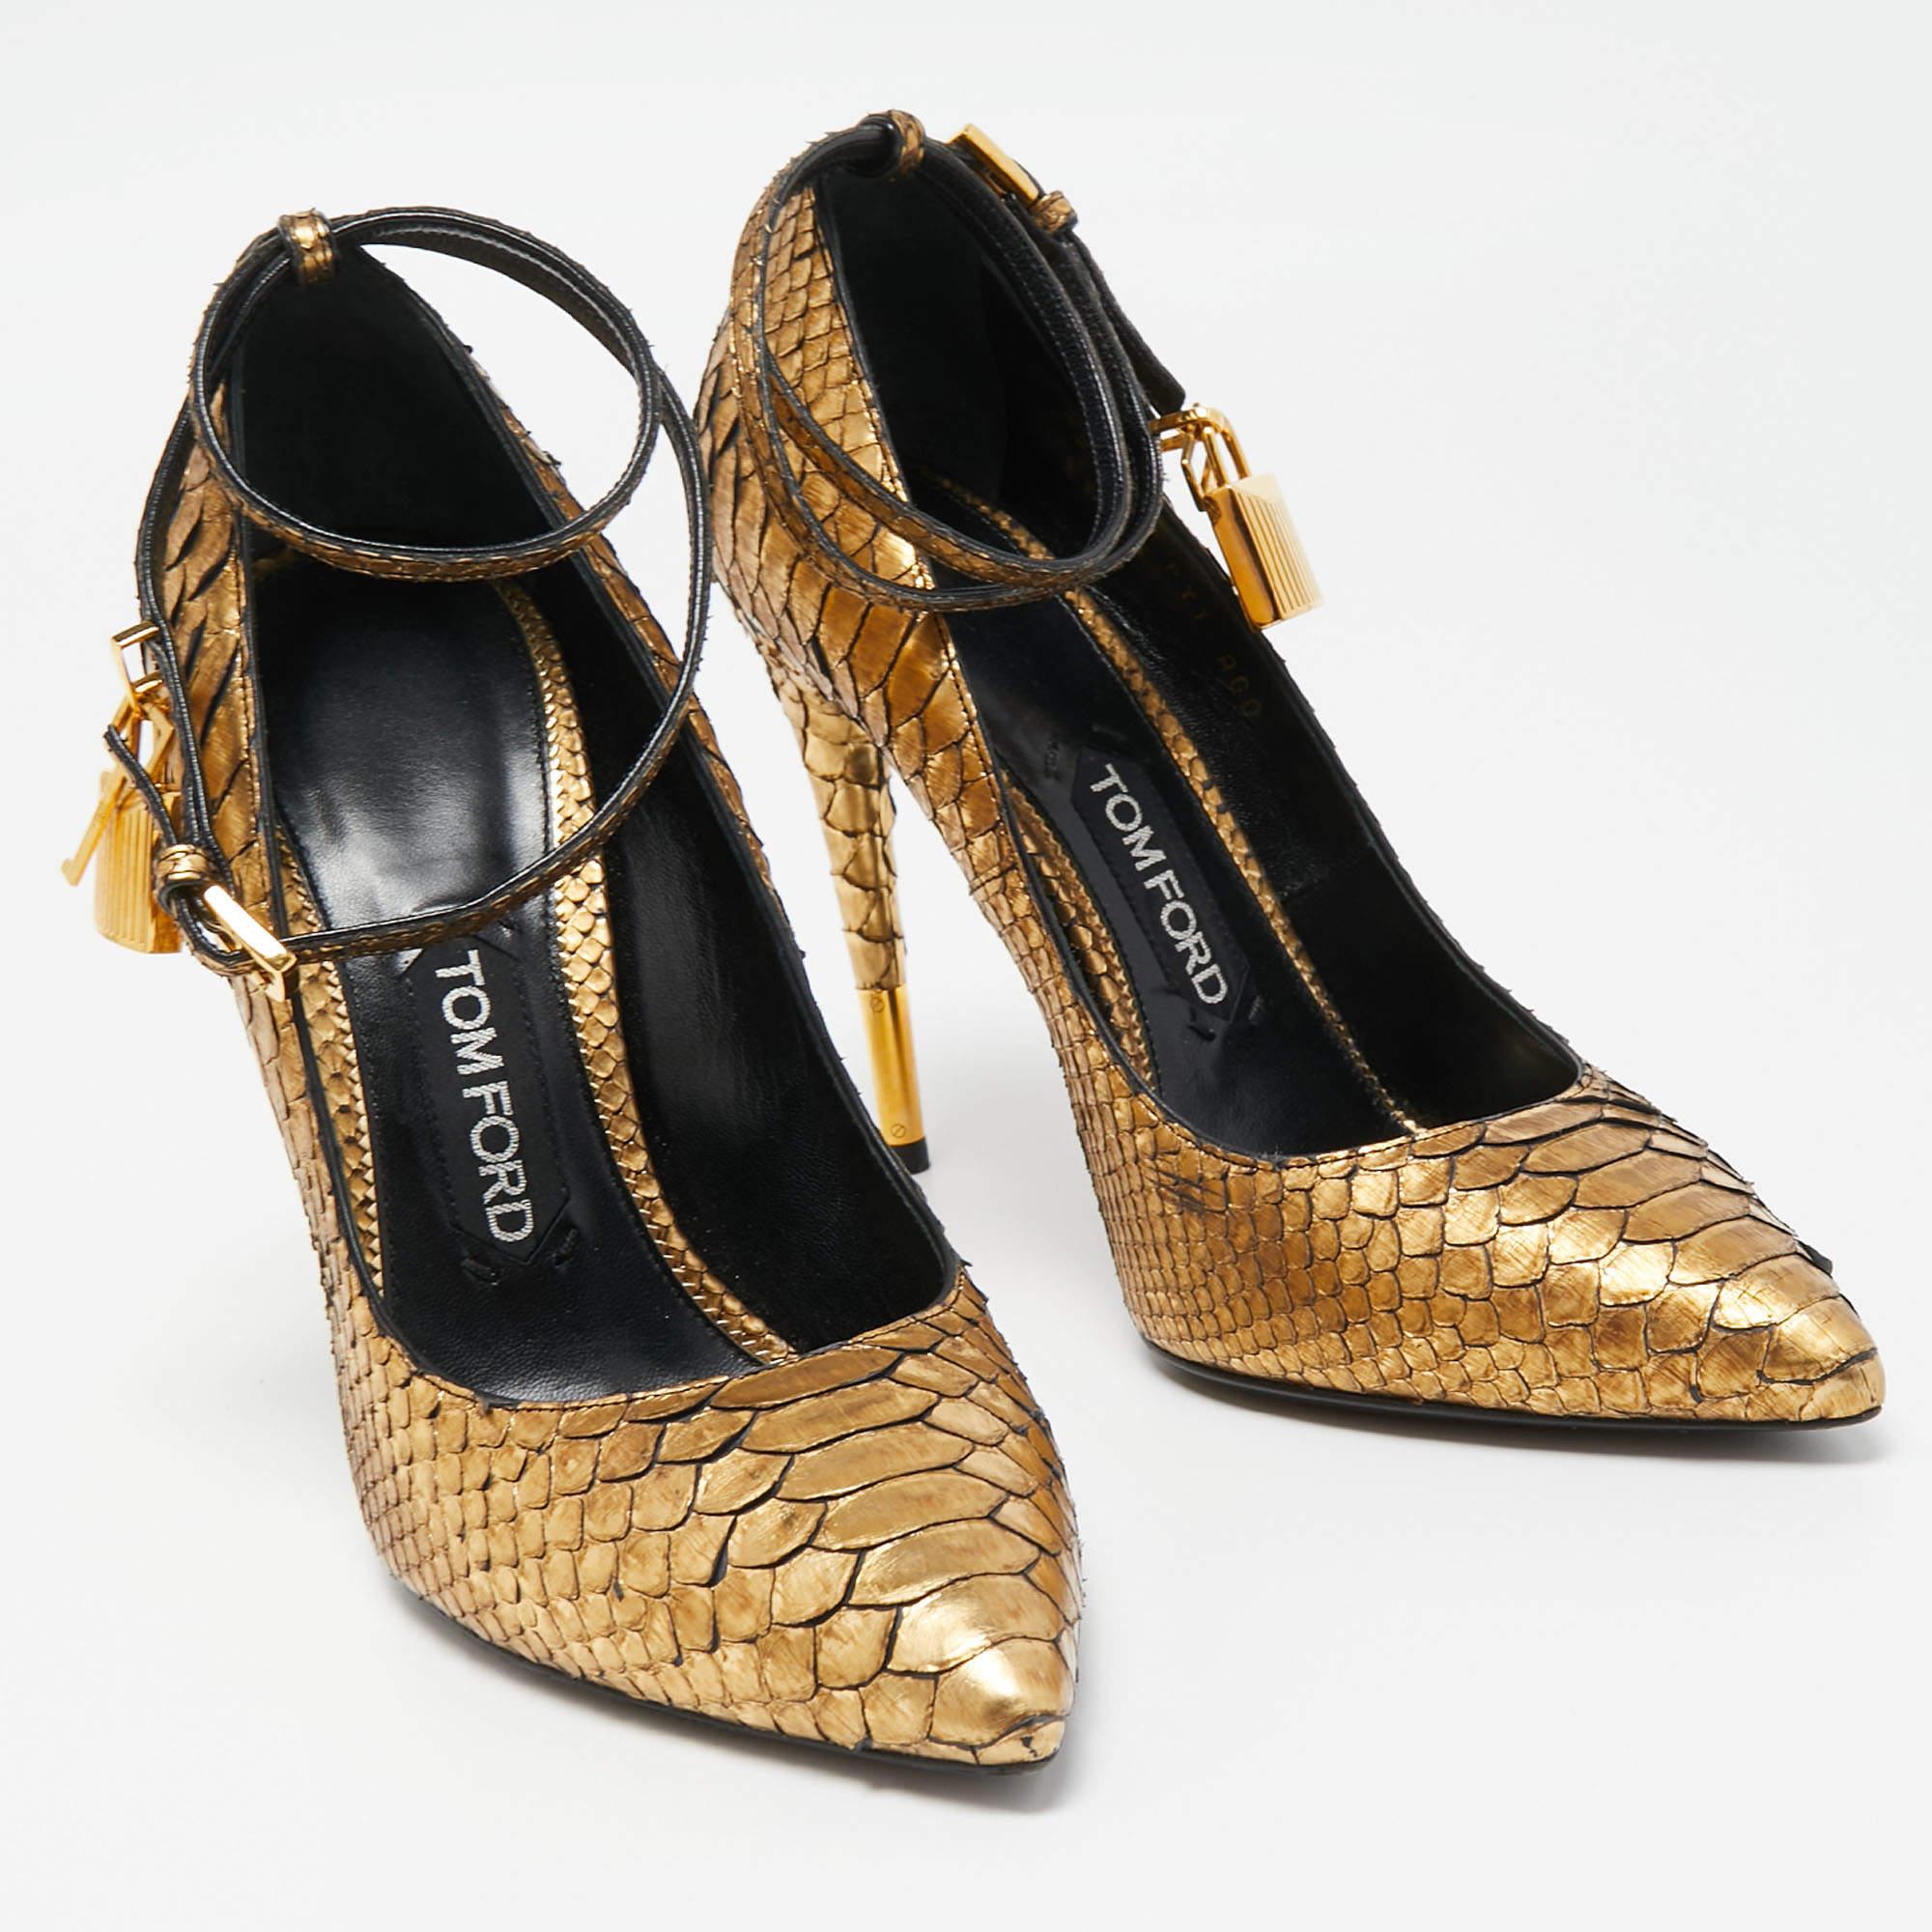 These timeless Tom Ford pumps are meant to last you season after season. Crafted using python leather, they are designed with a sleek arch, pointed toes, and 12 cm heels.


Includes
Original Dustbag